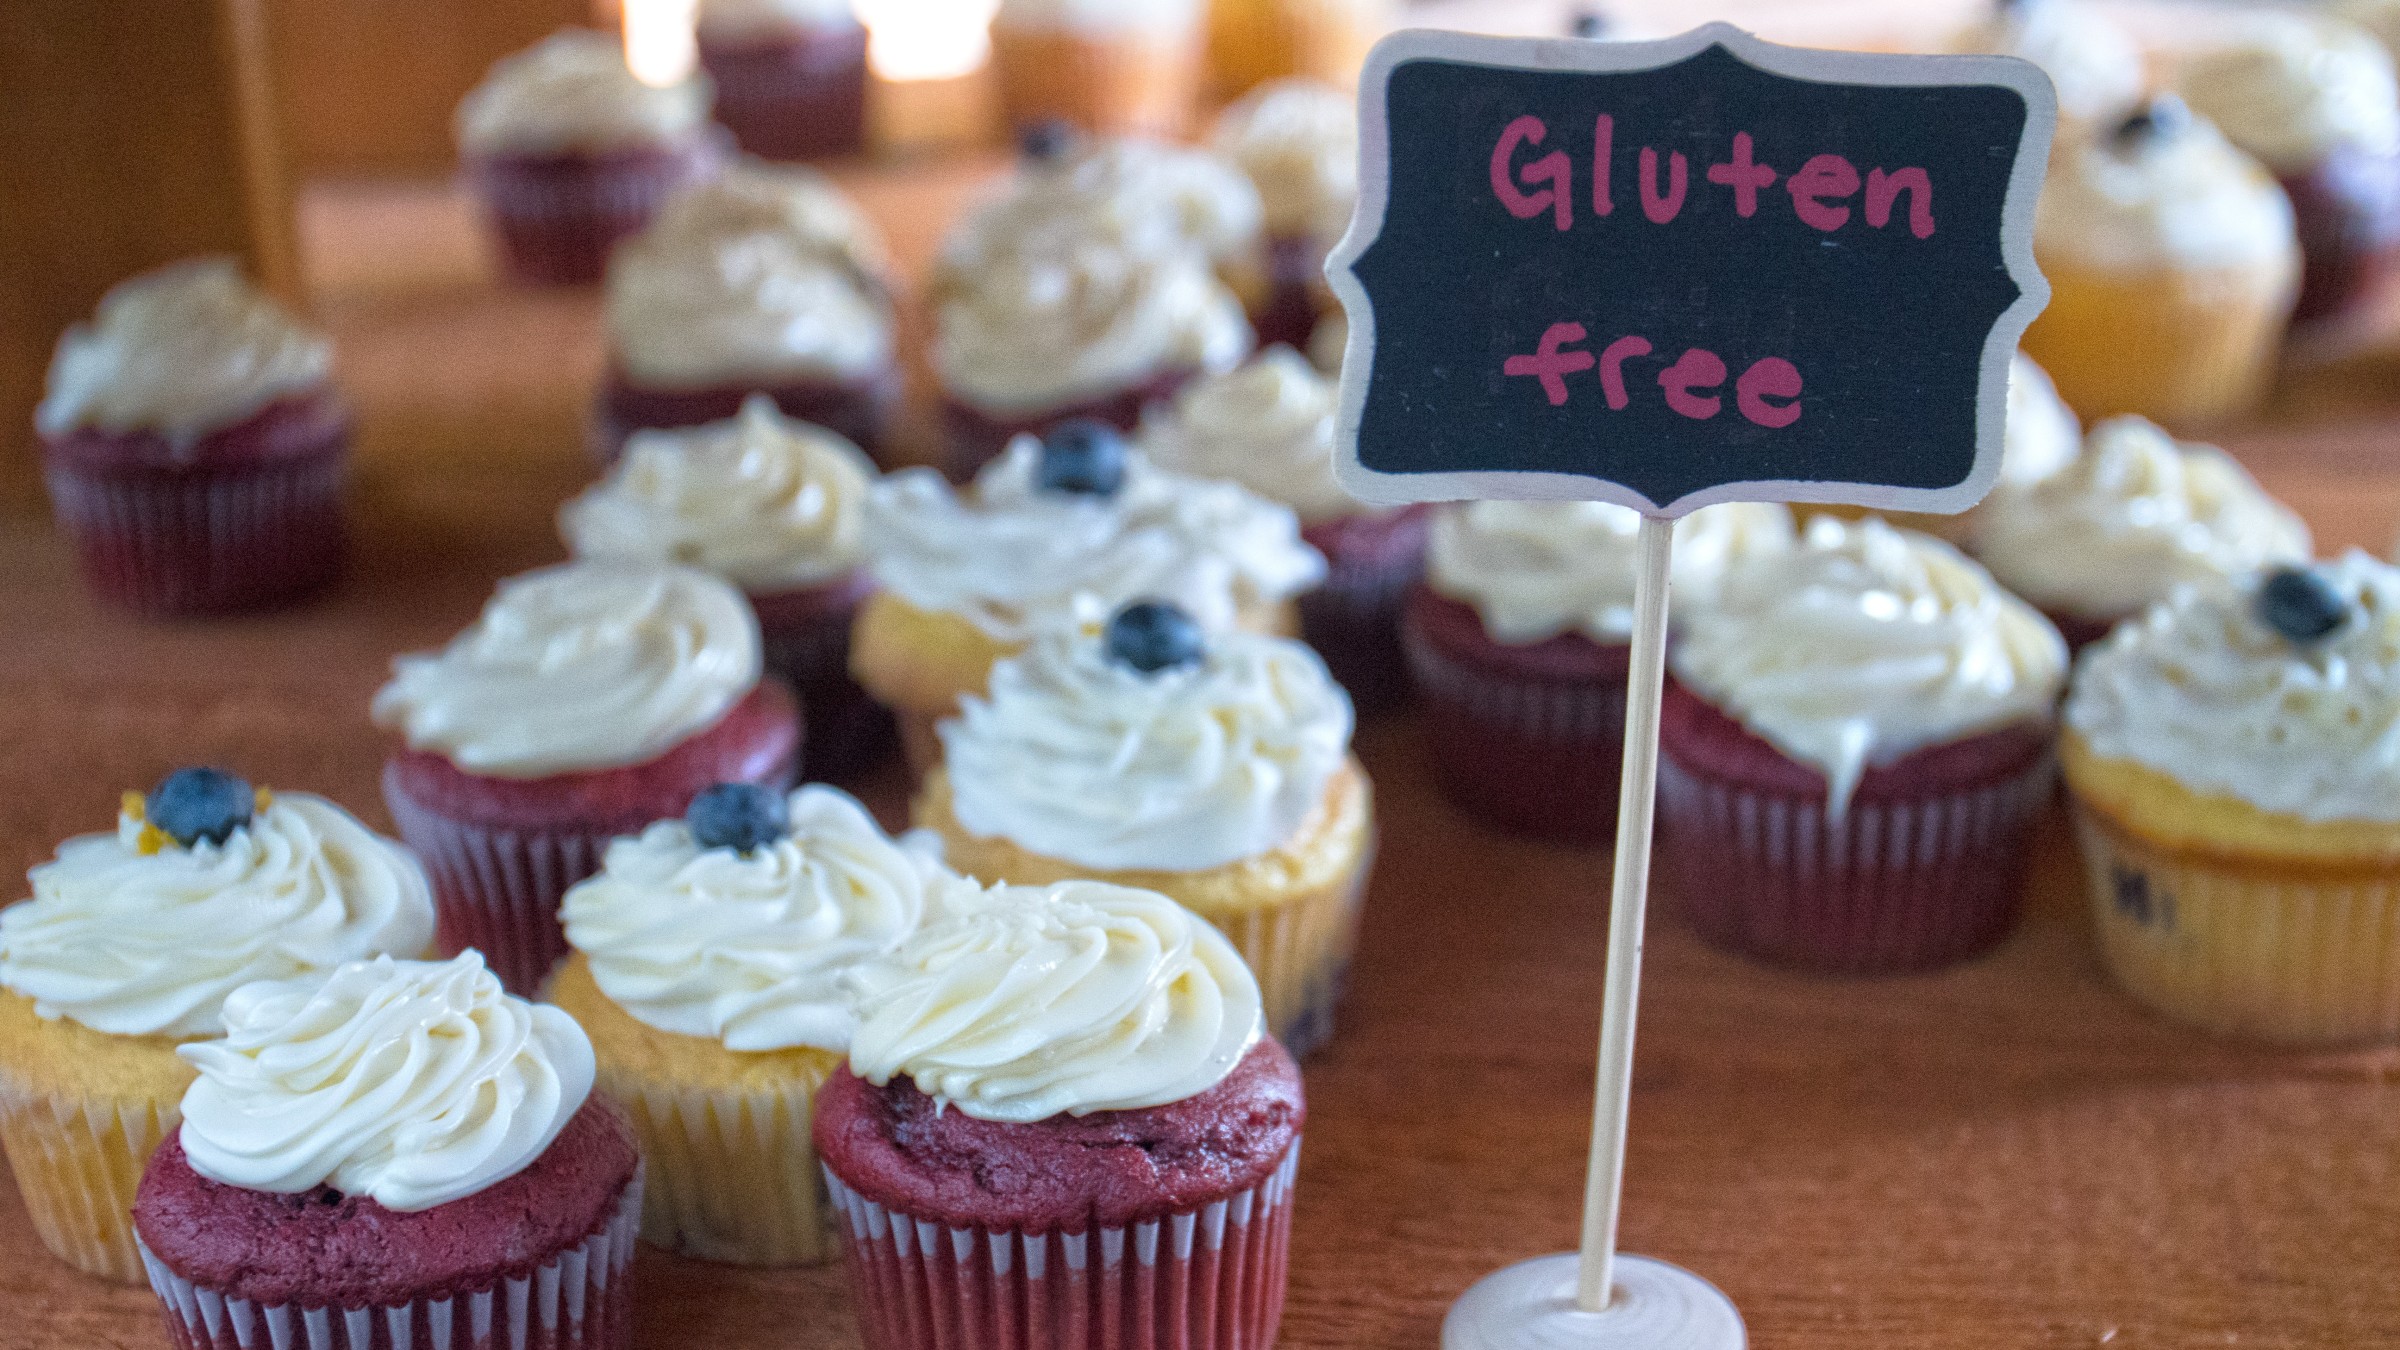 What Are the Symptoms of Gluten Intolerance? - GoodRx